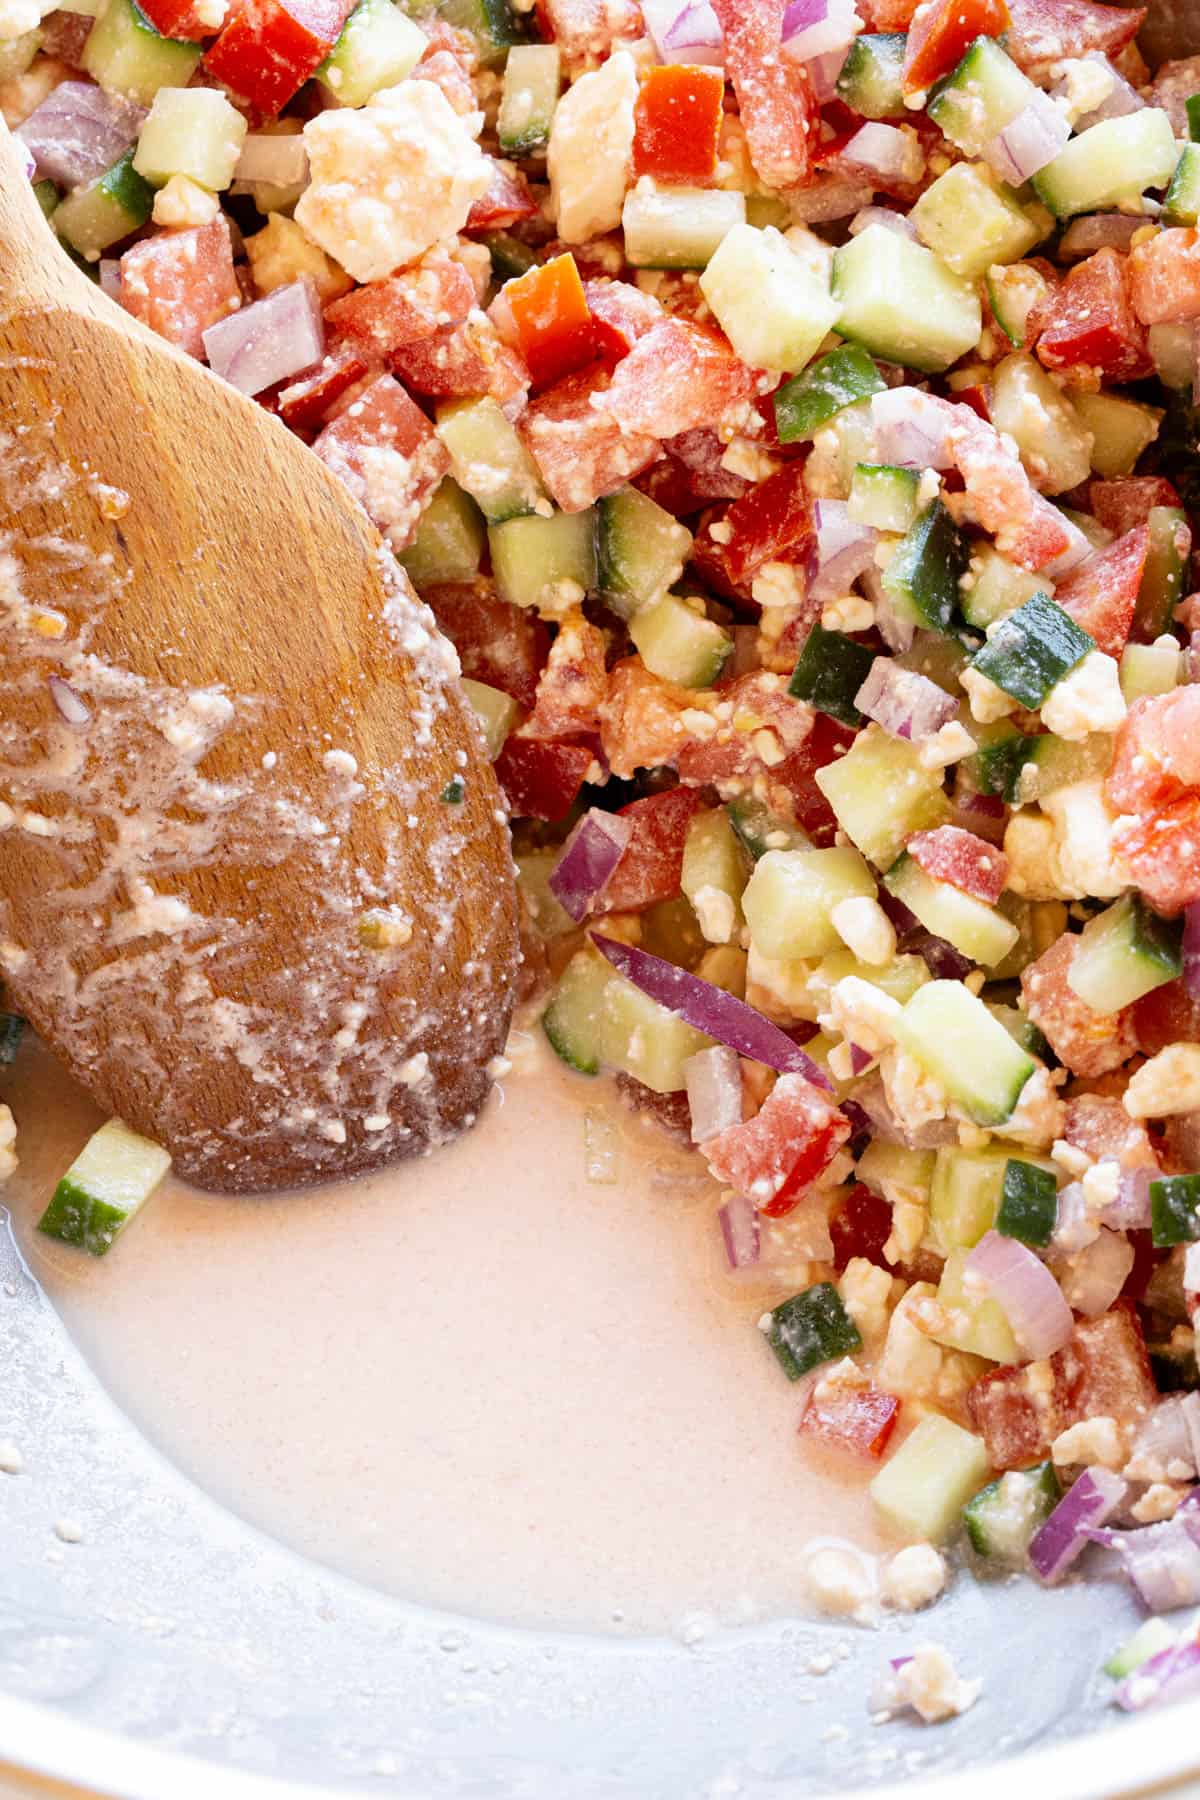 A wooden spoon pulls back chopped salad to show the self made sauce at the bottom.